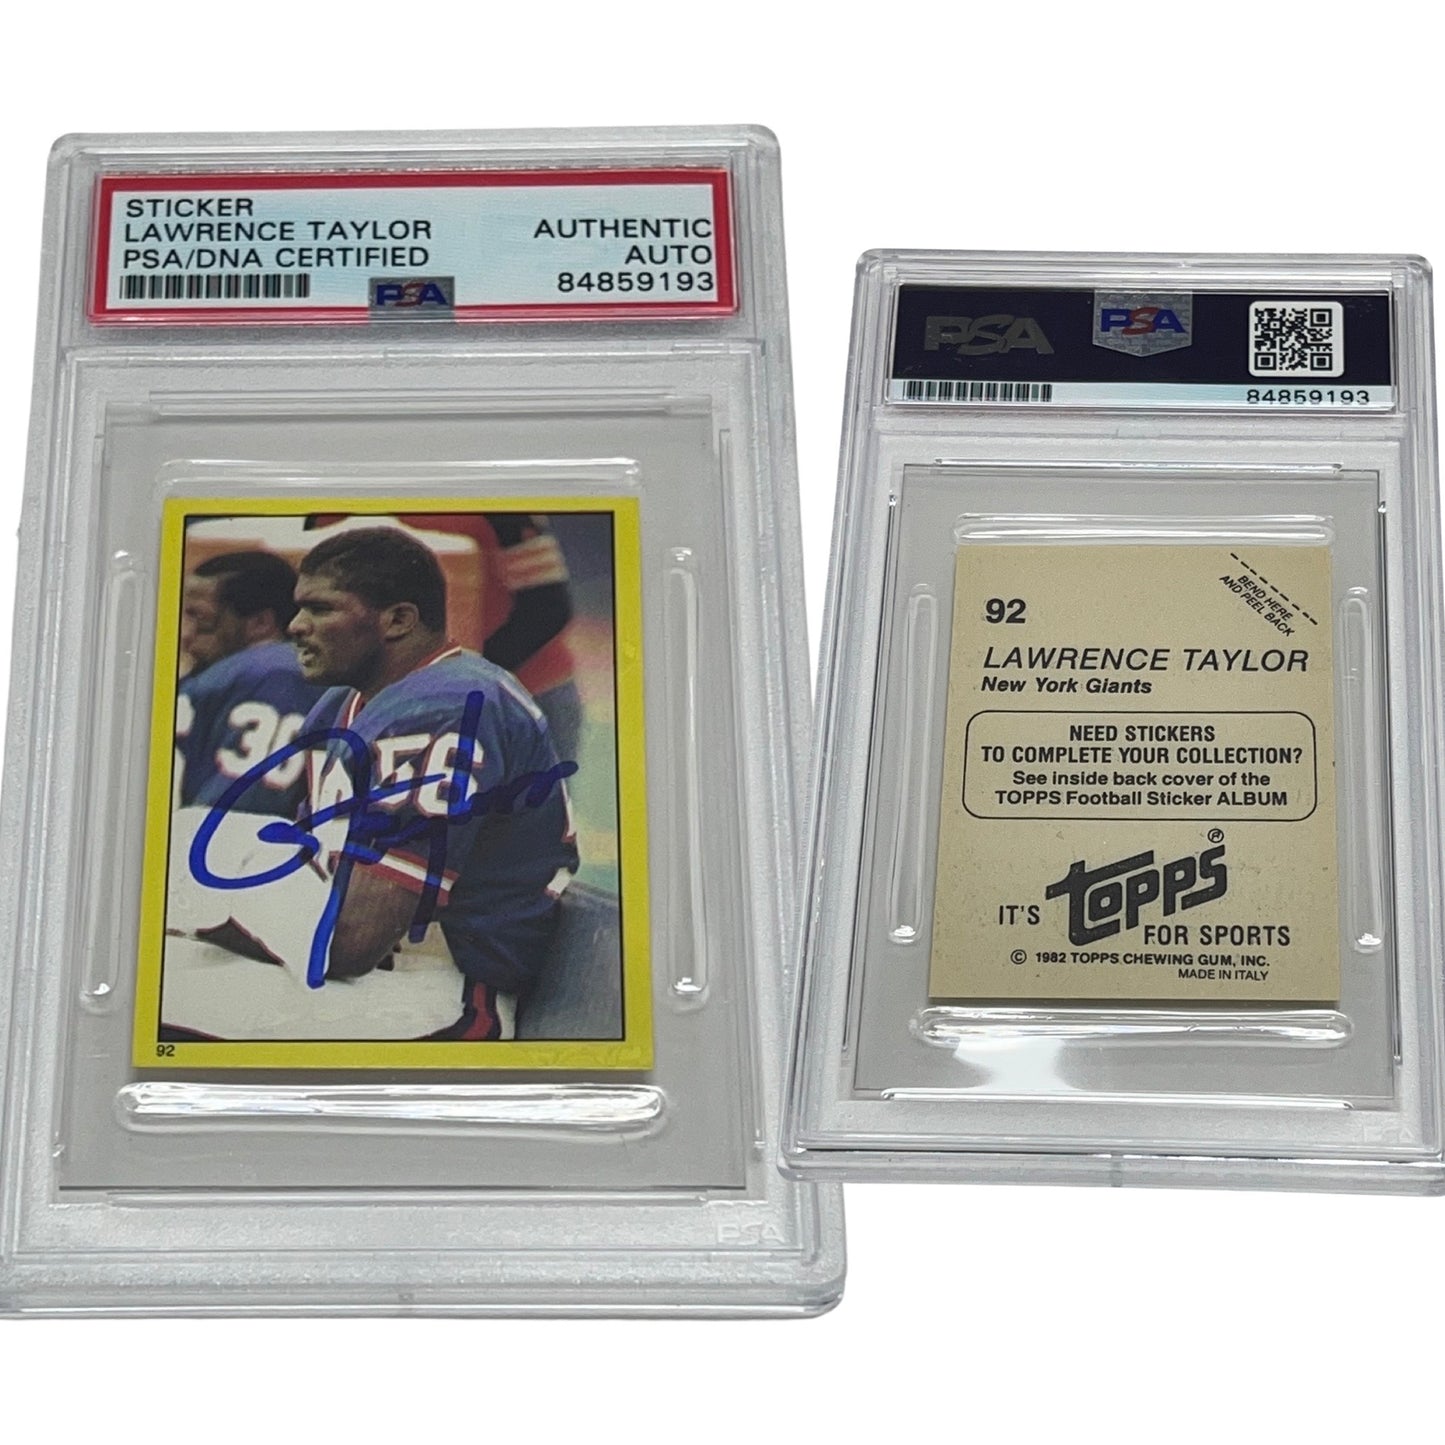 1982 Lawrence Taylor Topps Sticker Rookie Card #92 Autographed PSA Auto Authentic